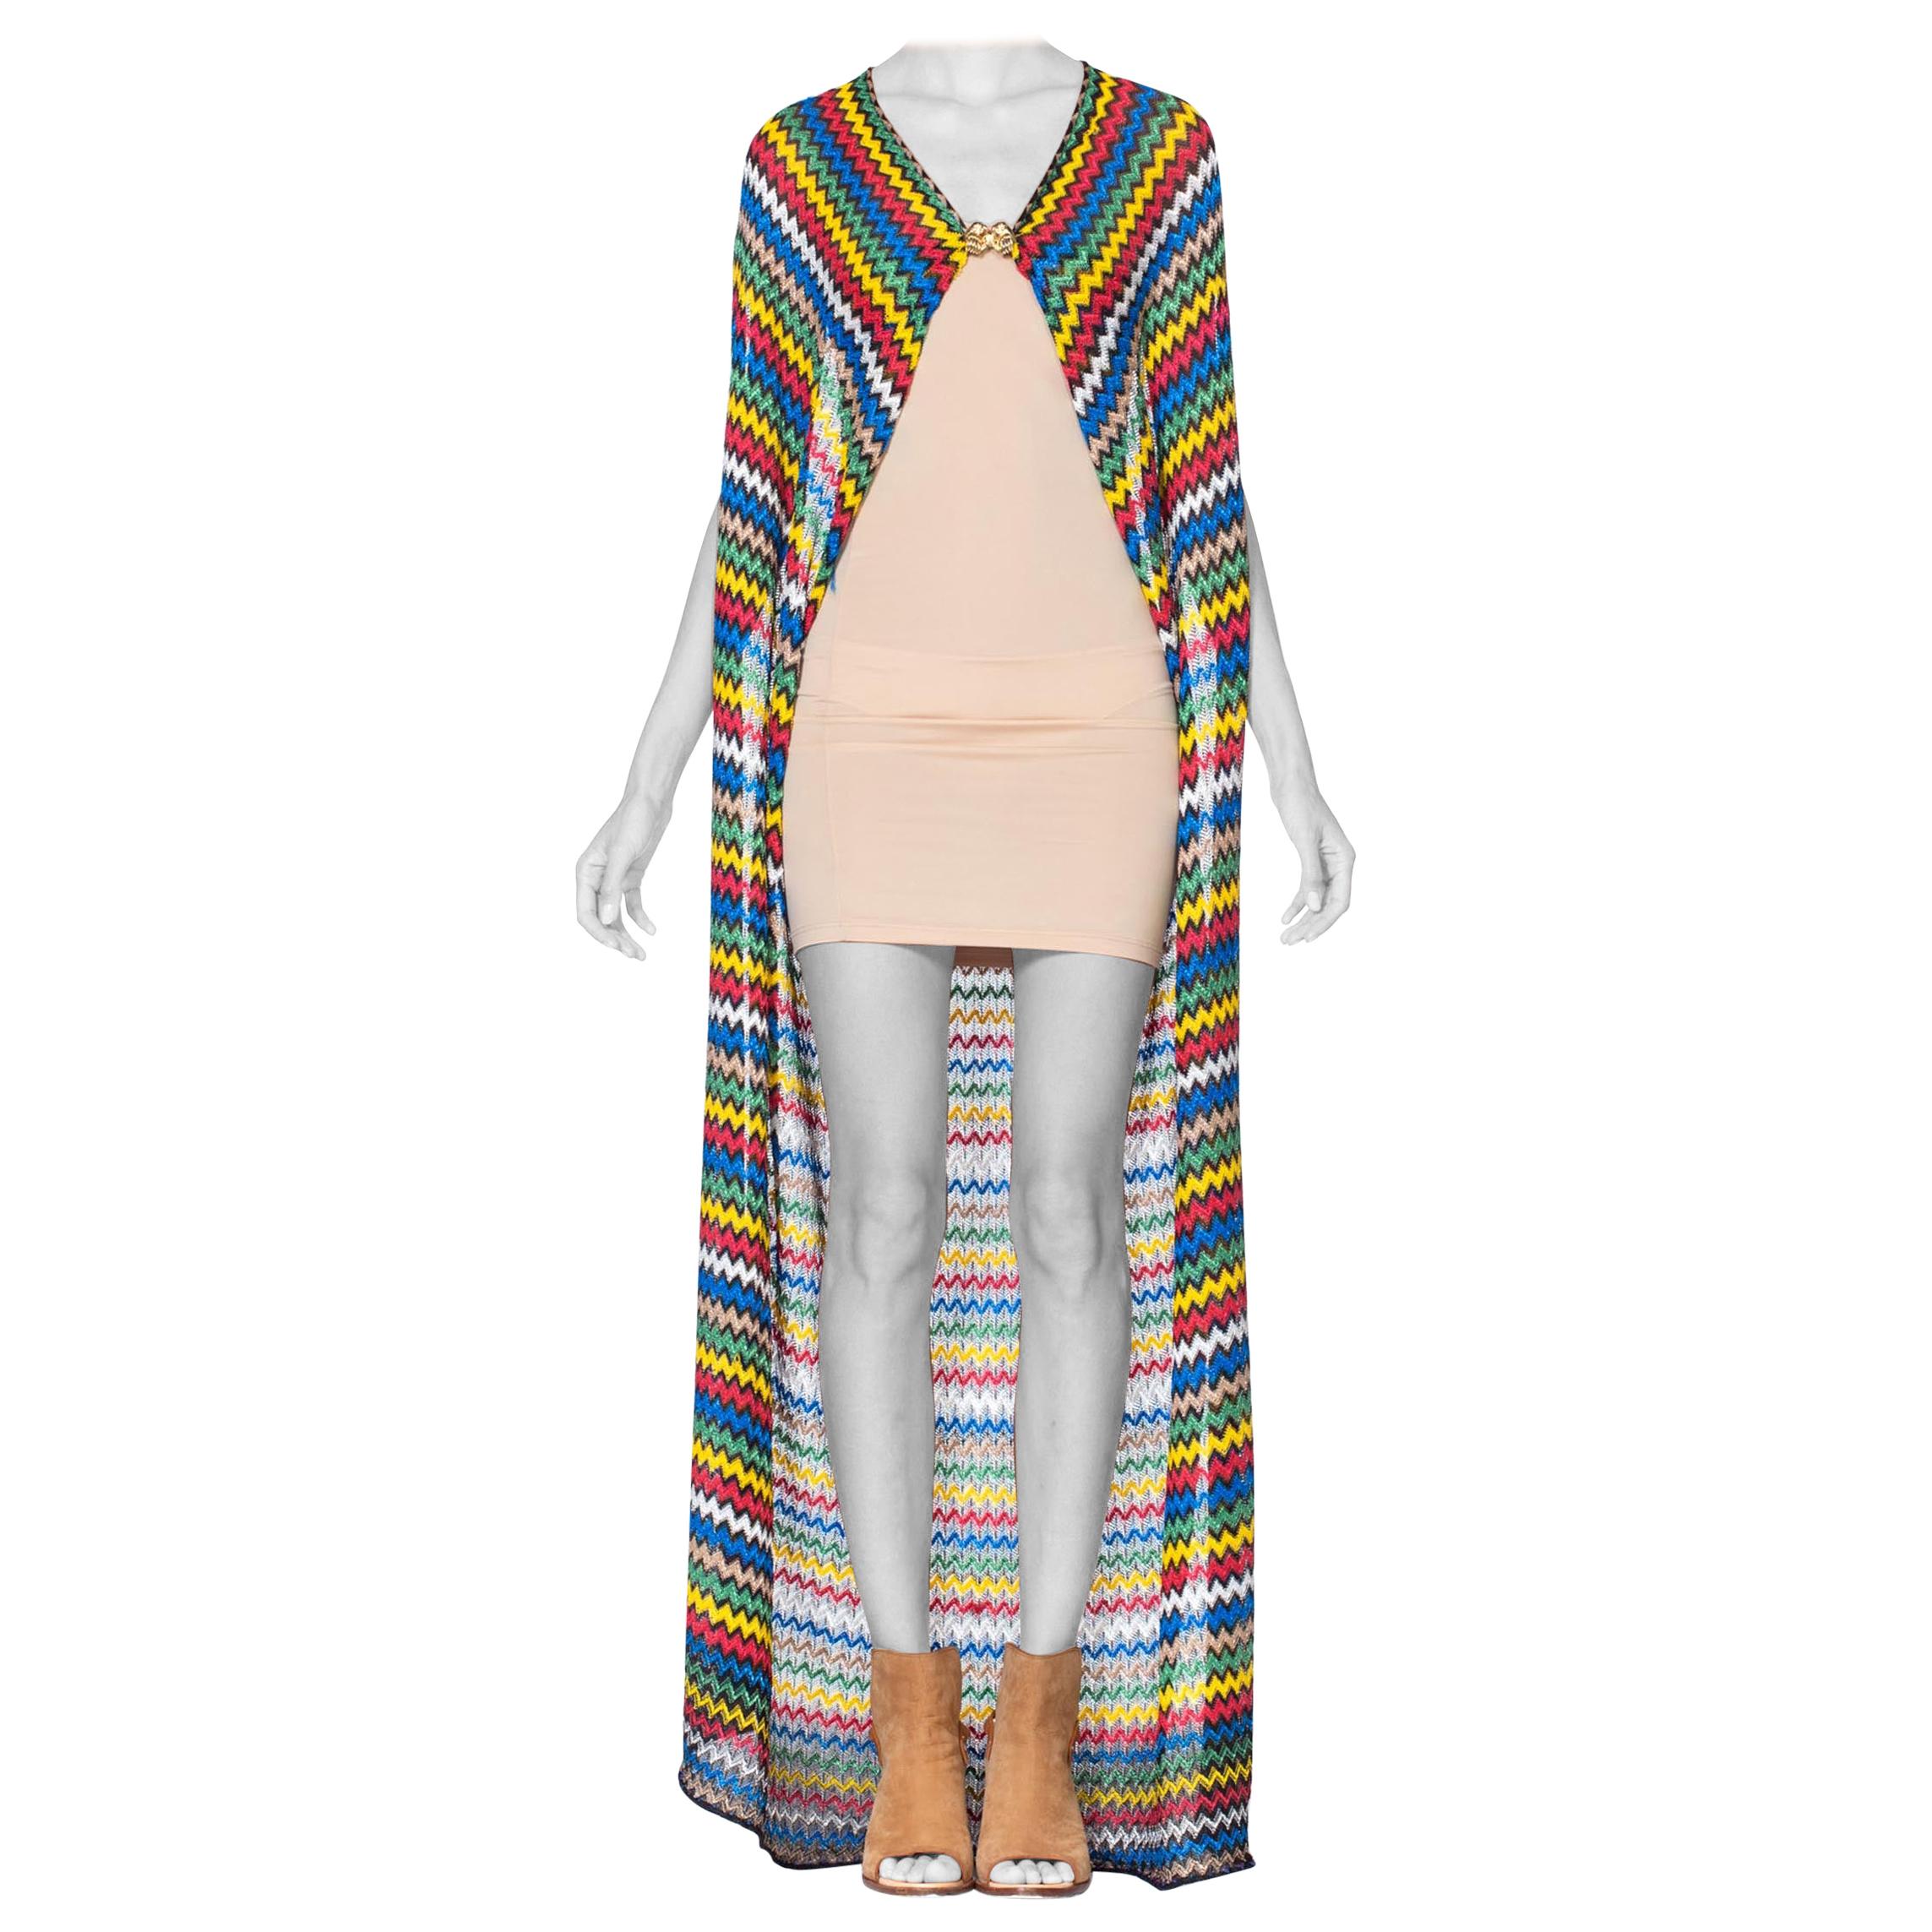 MORPHEW COLLECTION Multicolor Striped Knit Duster Top With Gold Parrot Clasp For Sale